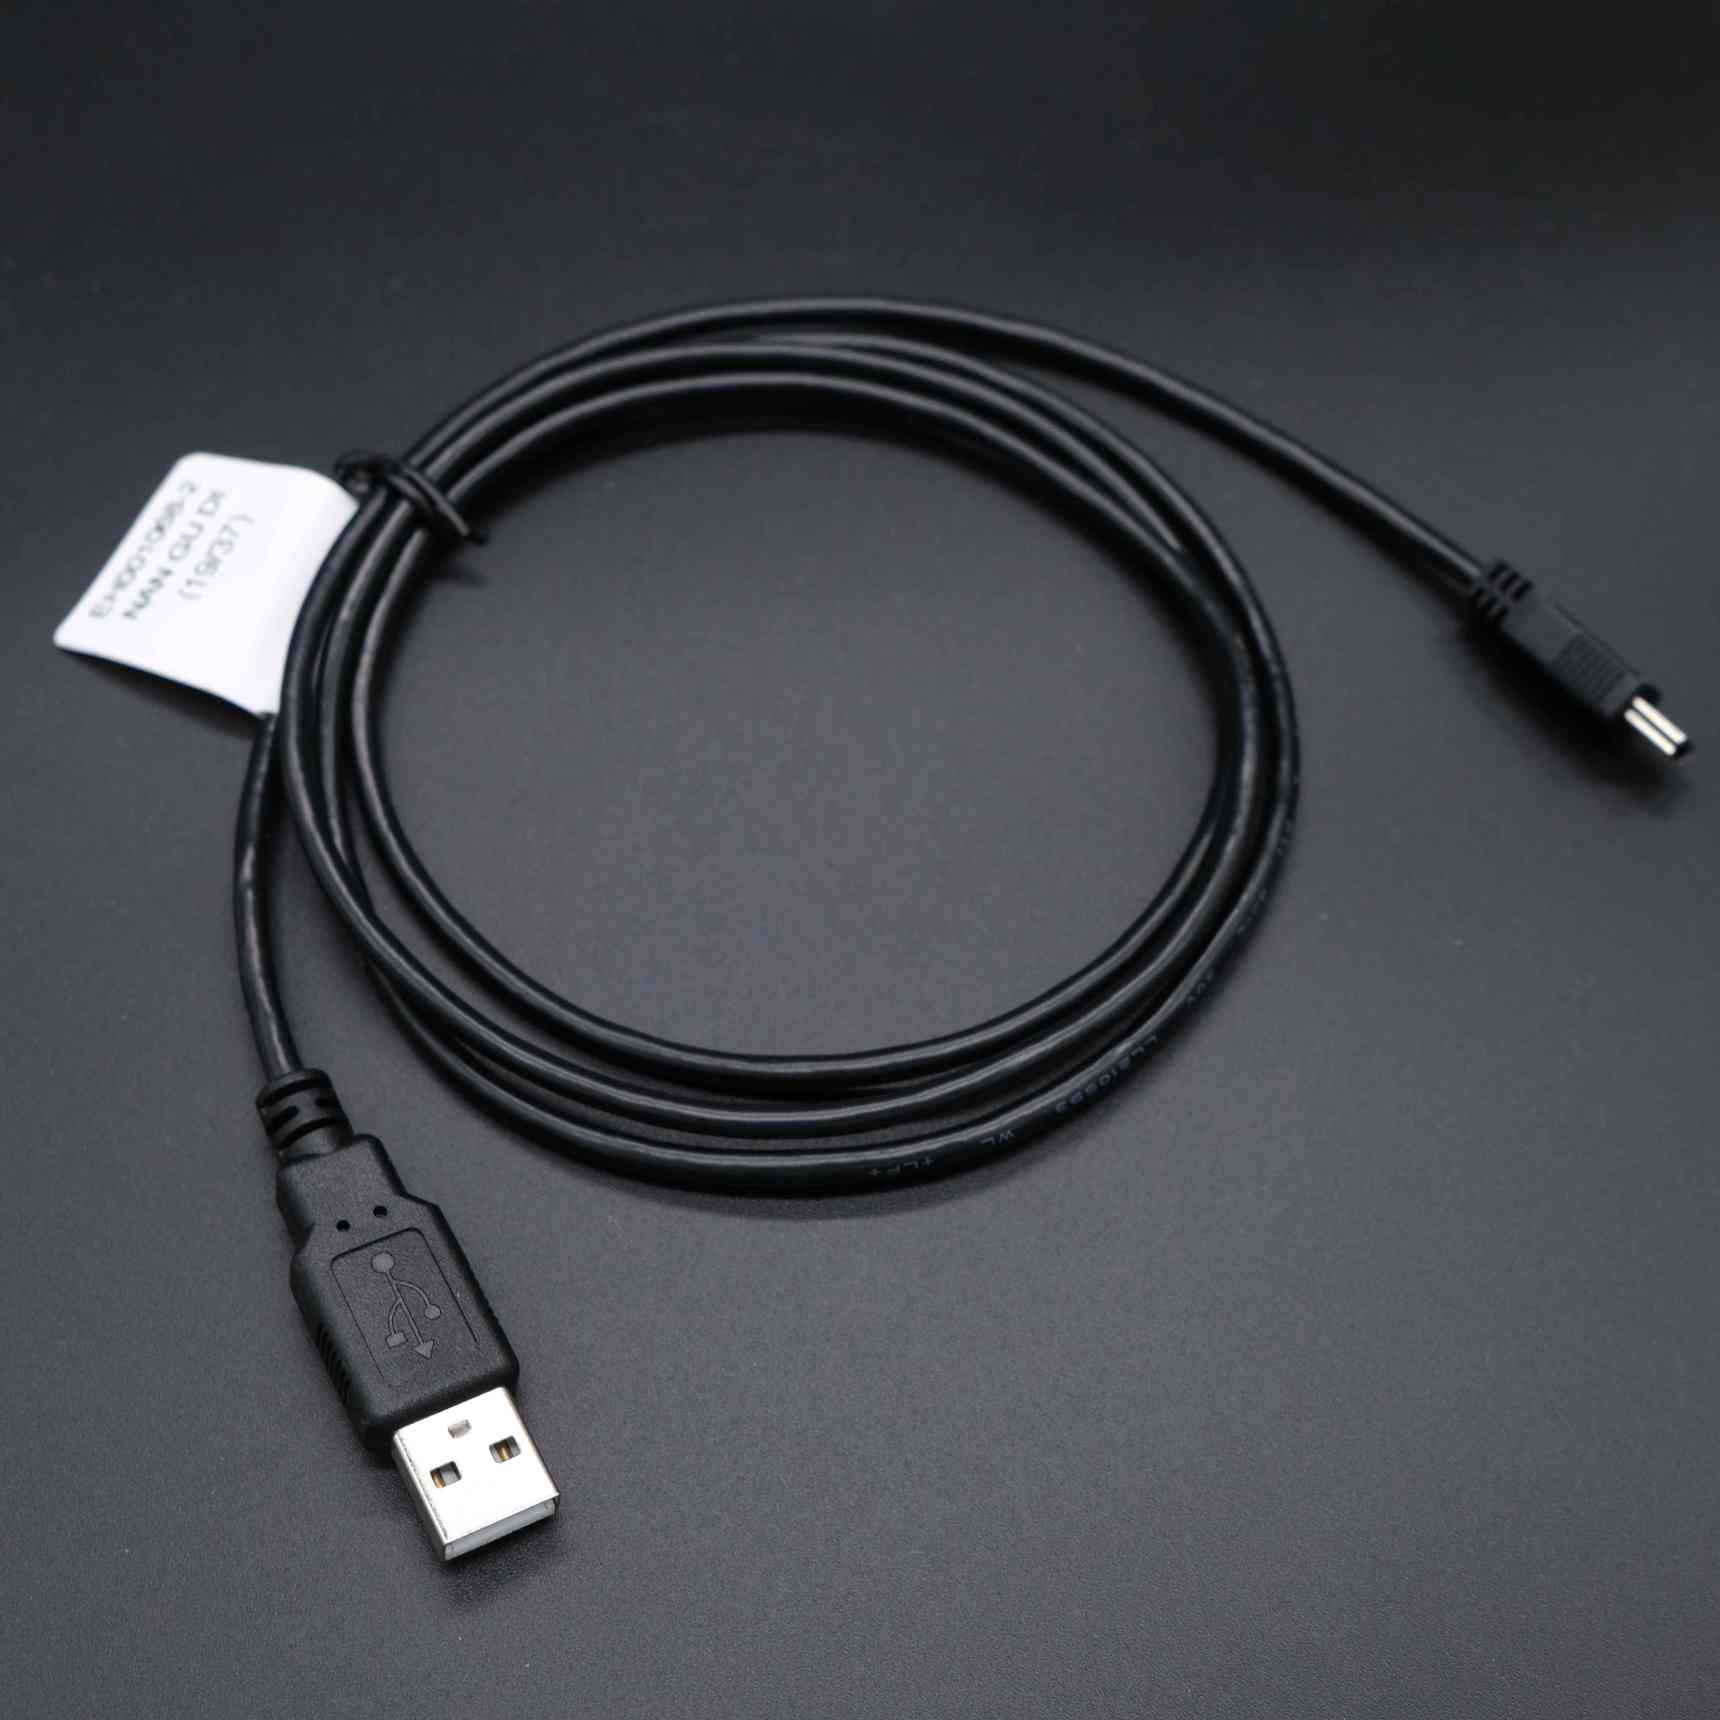 Mini USB  to USB 2.0 Fast Data Charger Cable for MP3 MP4 Player Car DVR GPS Digital Camera HDD Mini USB